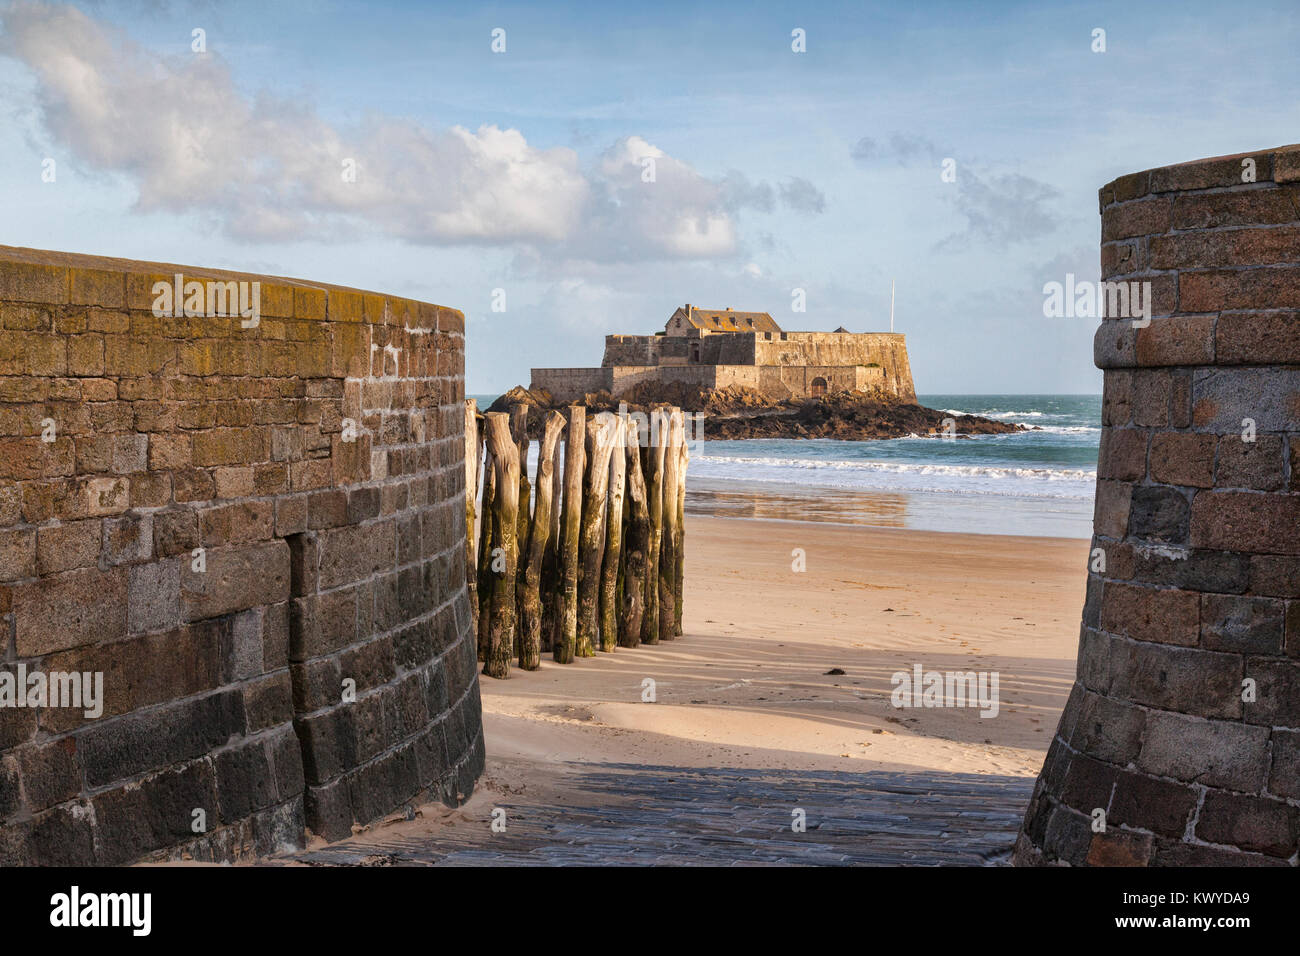 Saint Malo ramparts and beach, and Fort National. Stock Photo